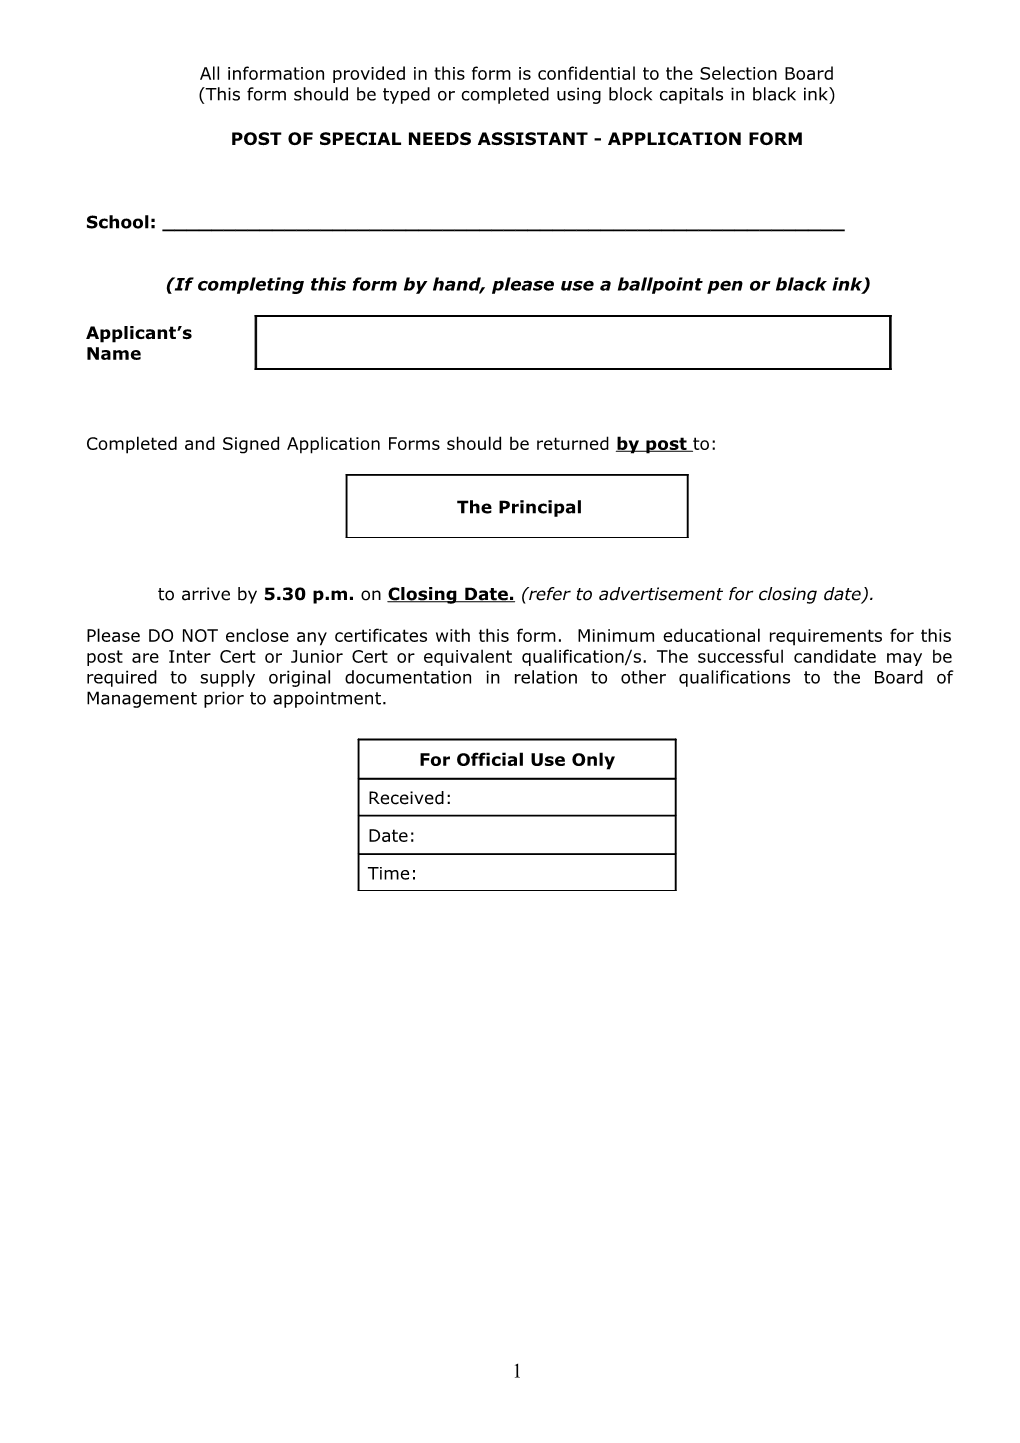 All Information Provided in This Form Is Confidential to the Selection Board s1